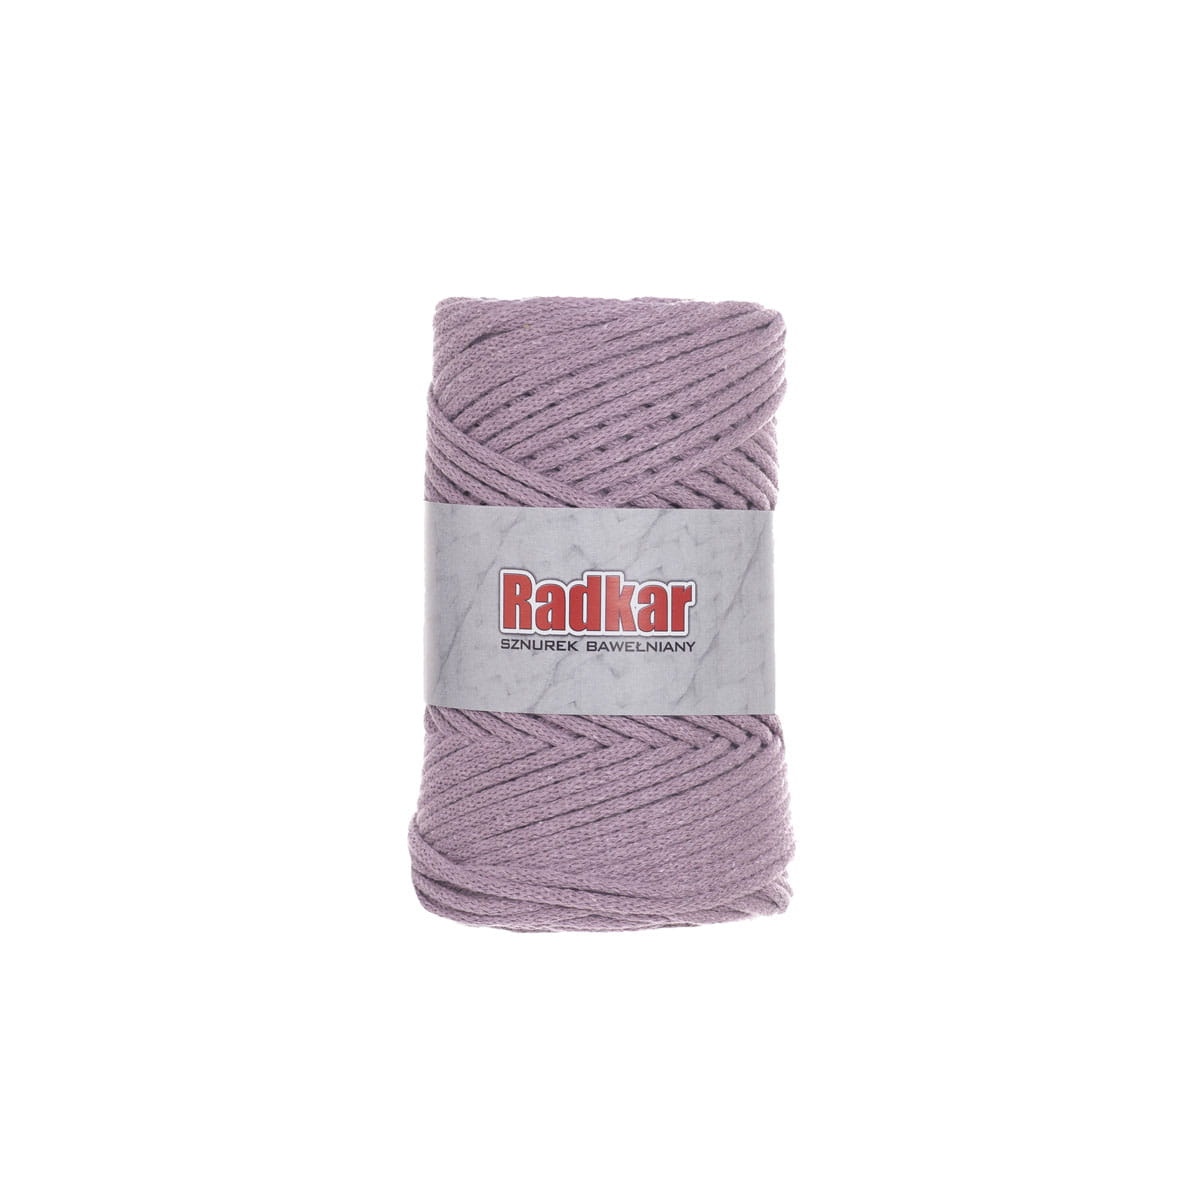 Dusty pink 310 3mm cotton cord